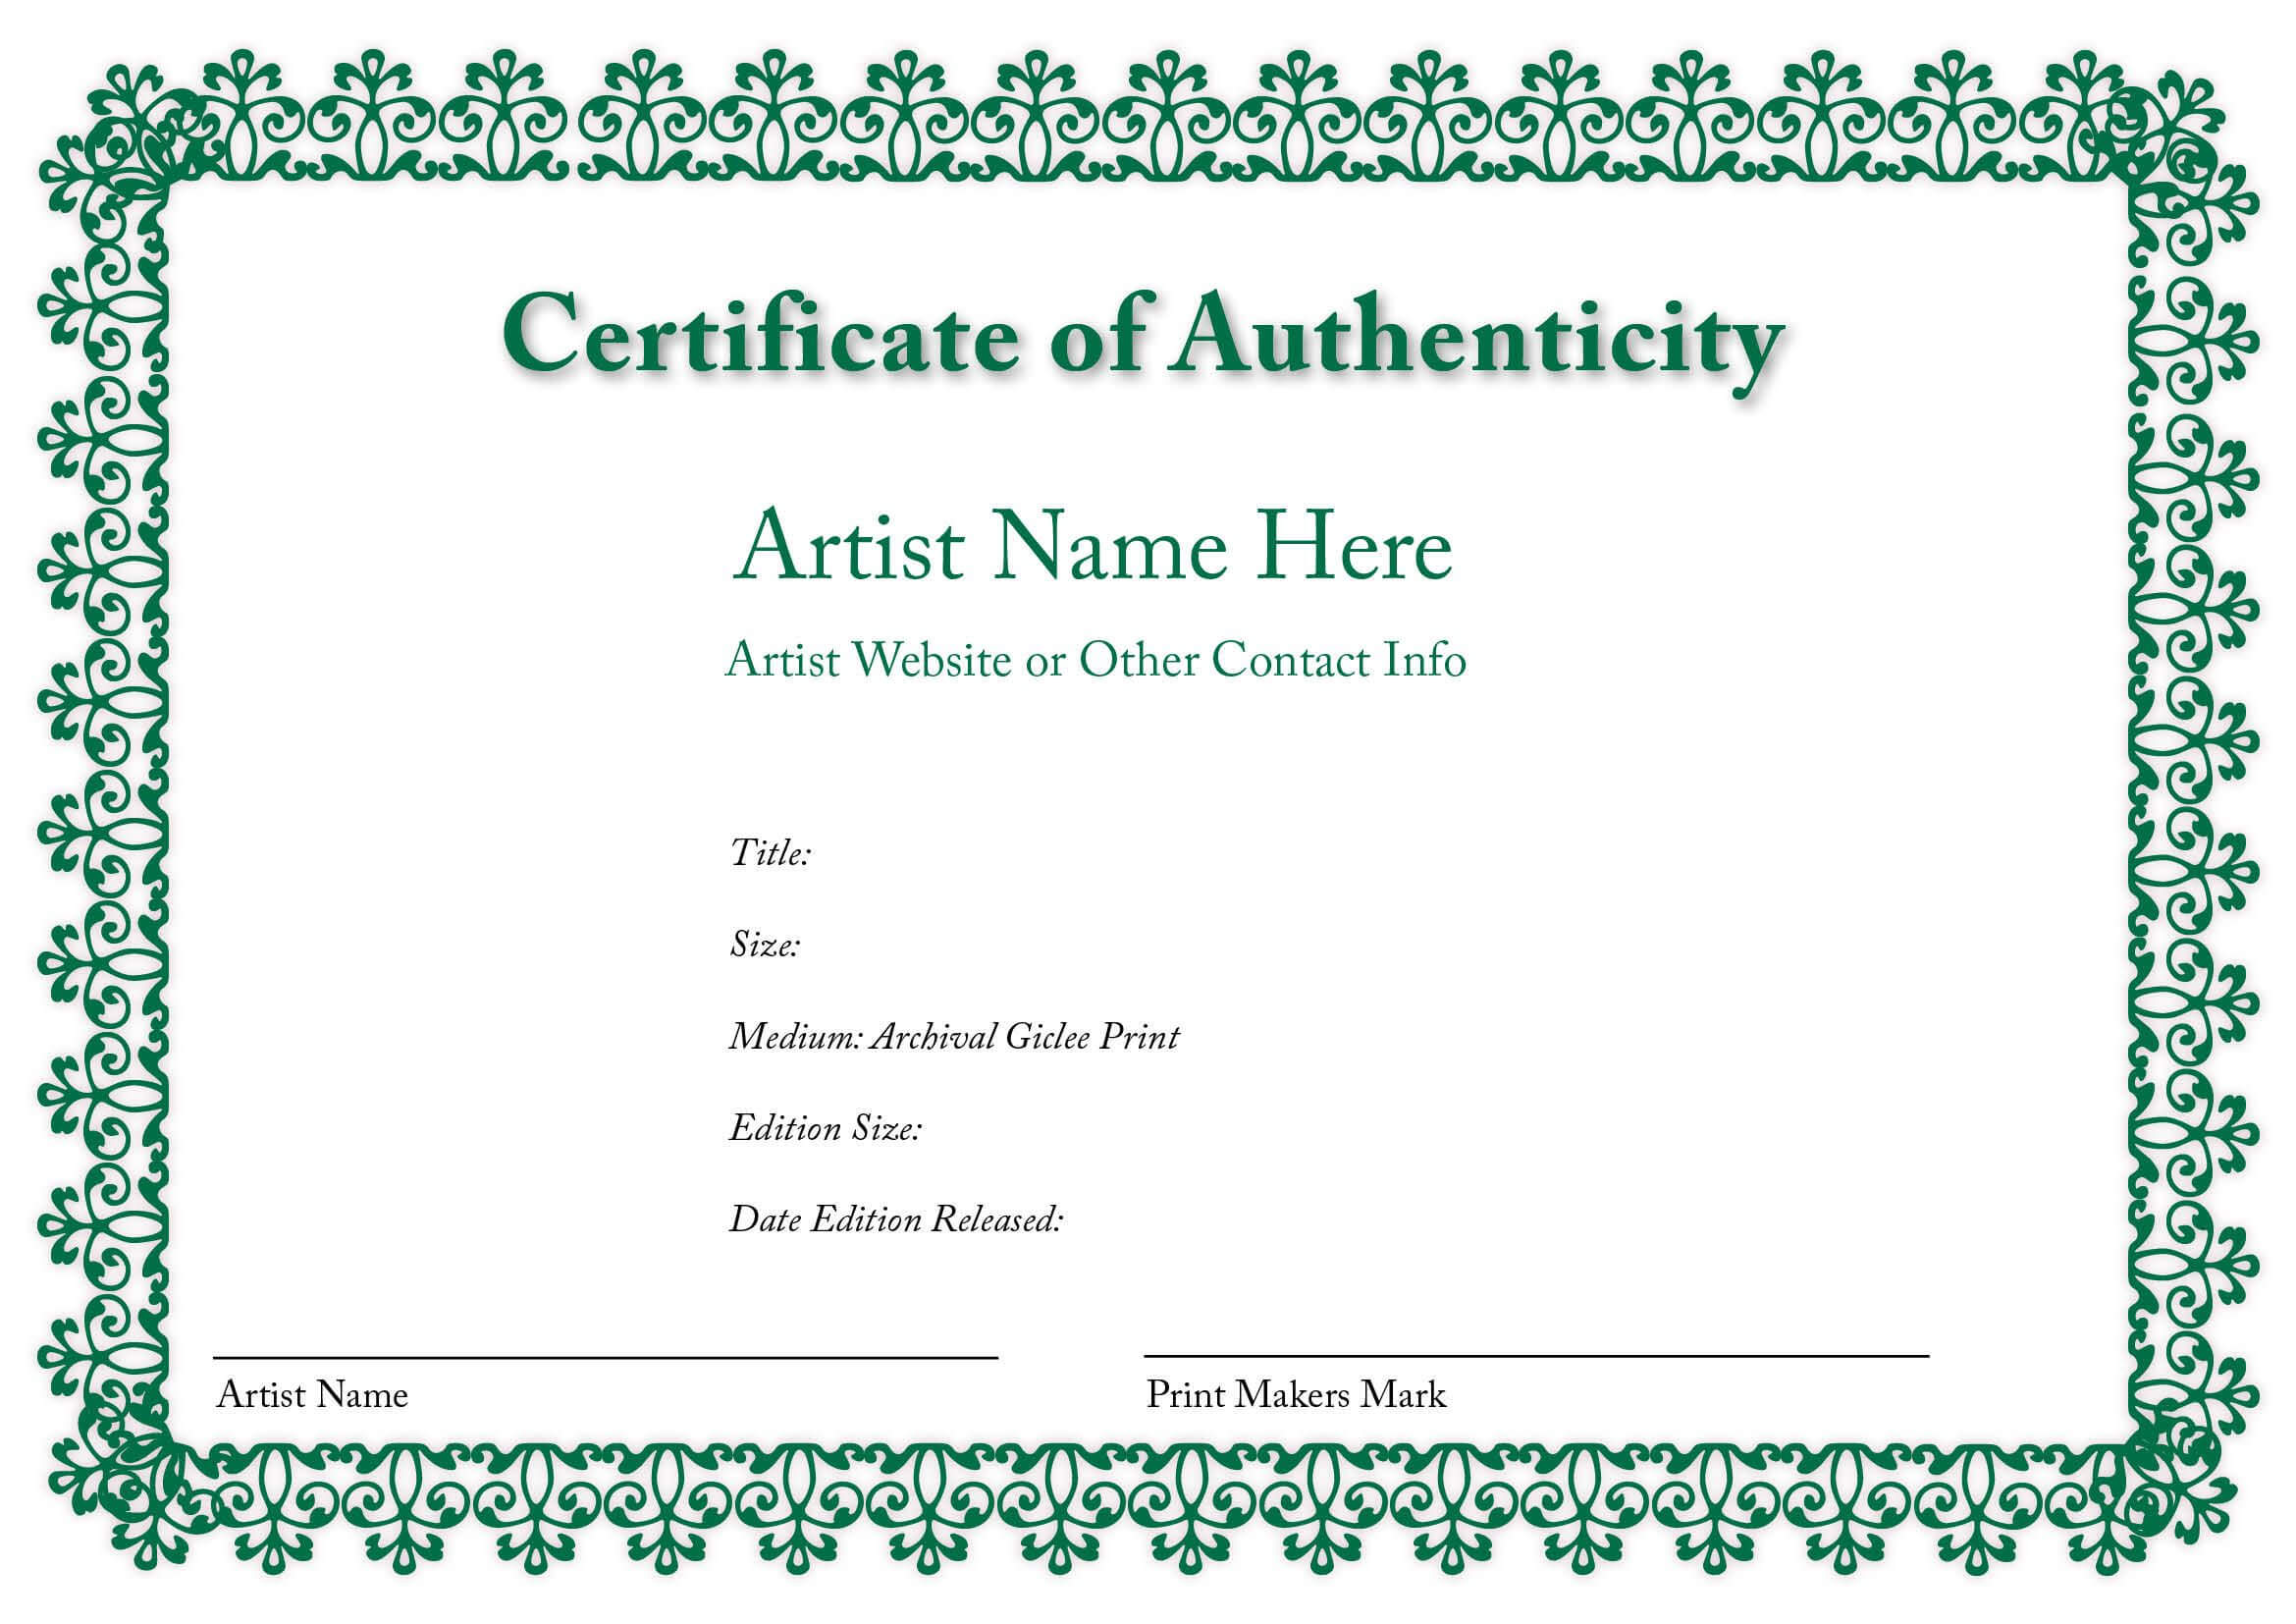 Certificate Of Authenticity Of An Art Print | Lettering Throughout Photography Certificate Of Authenticity Template